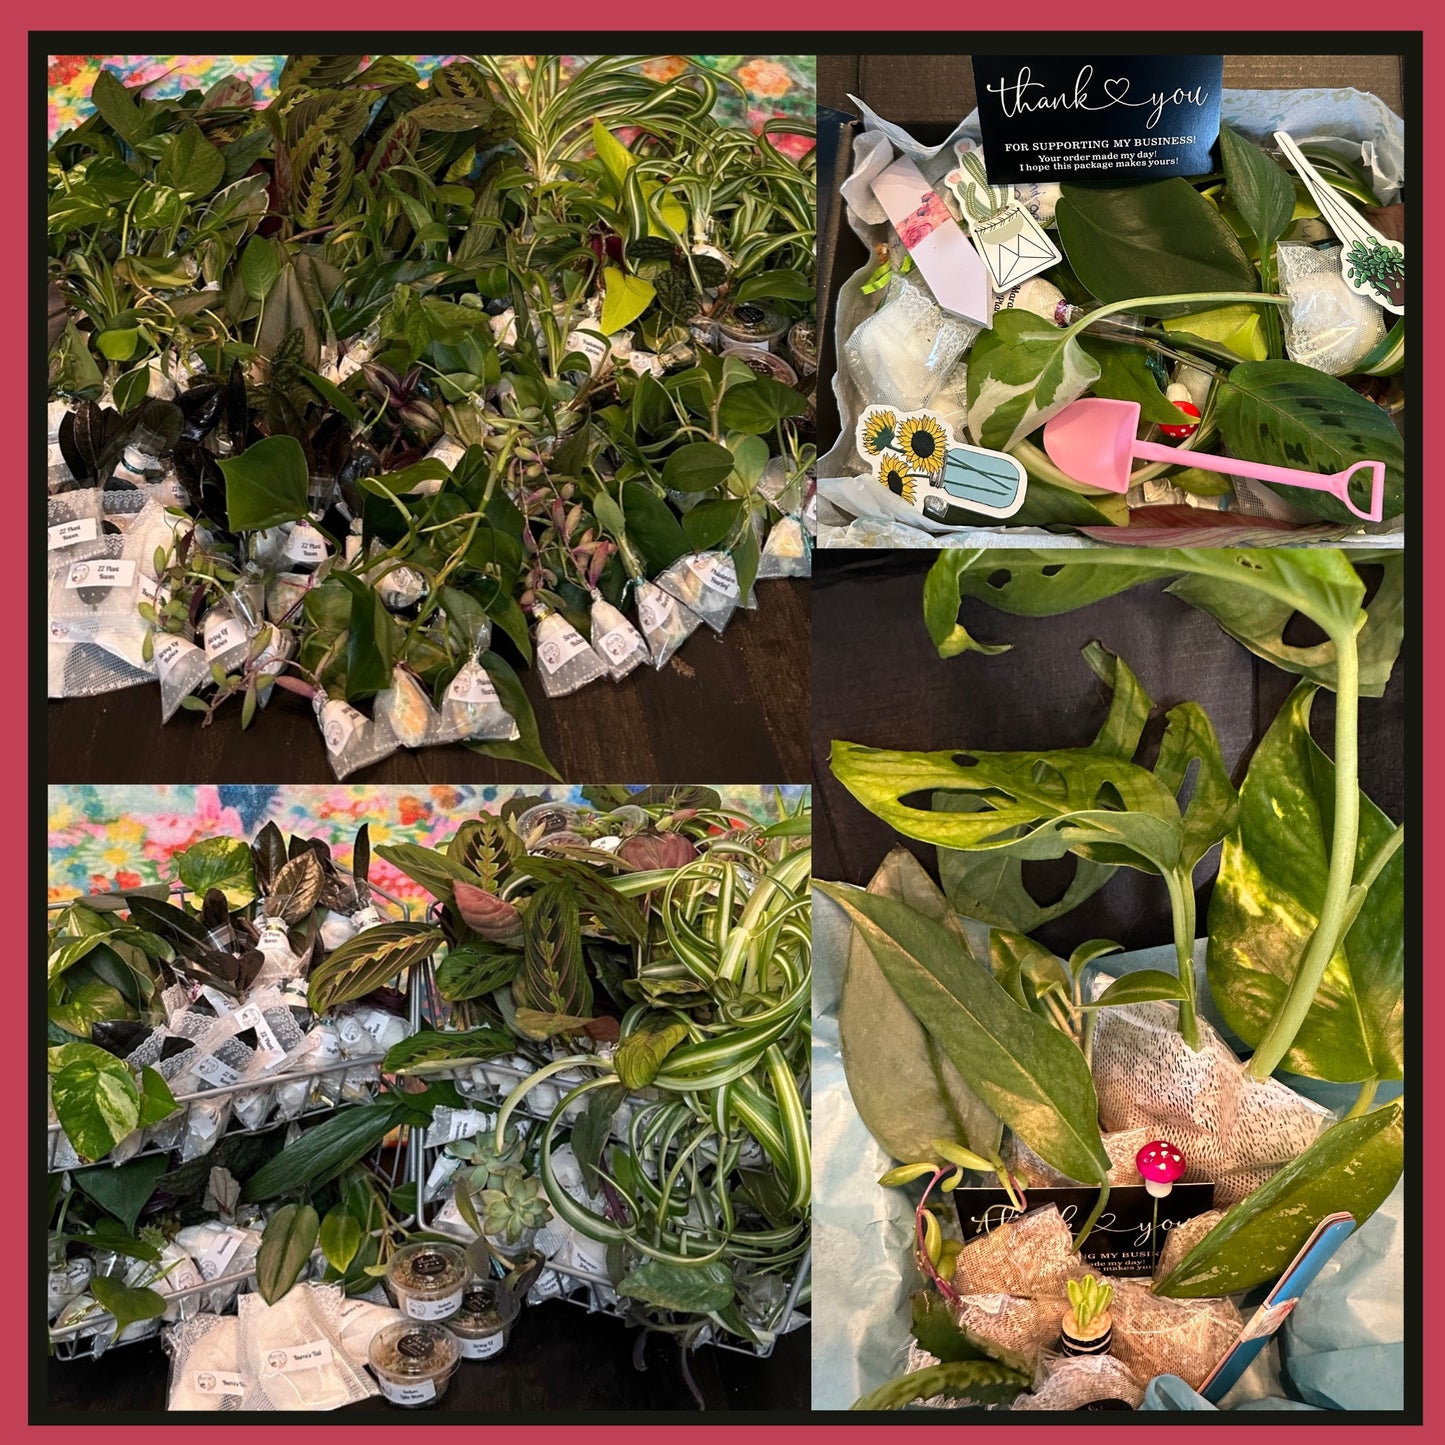 Unrooted plant cuttings for water propagation, propagation in sphagnum moss, propagation in soil. Variety of houseplant cuttings mystery box. Free gifts included. Gift for gardener, plant lover, plant person, houseplant enthusiast. Box of clippings.